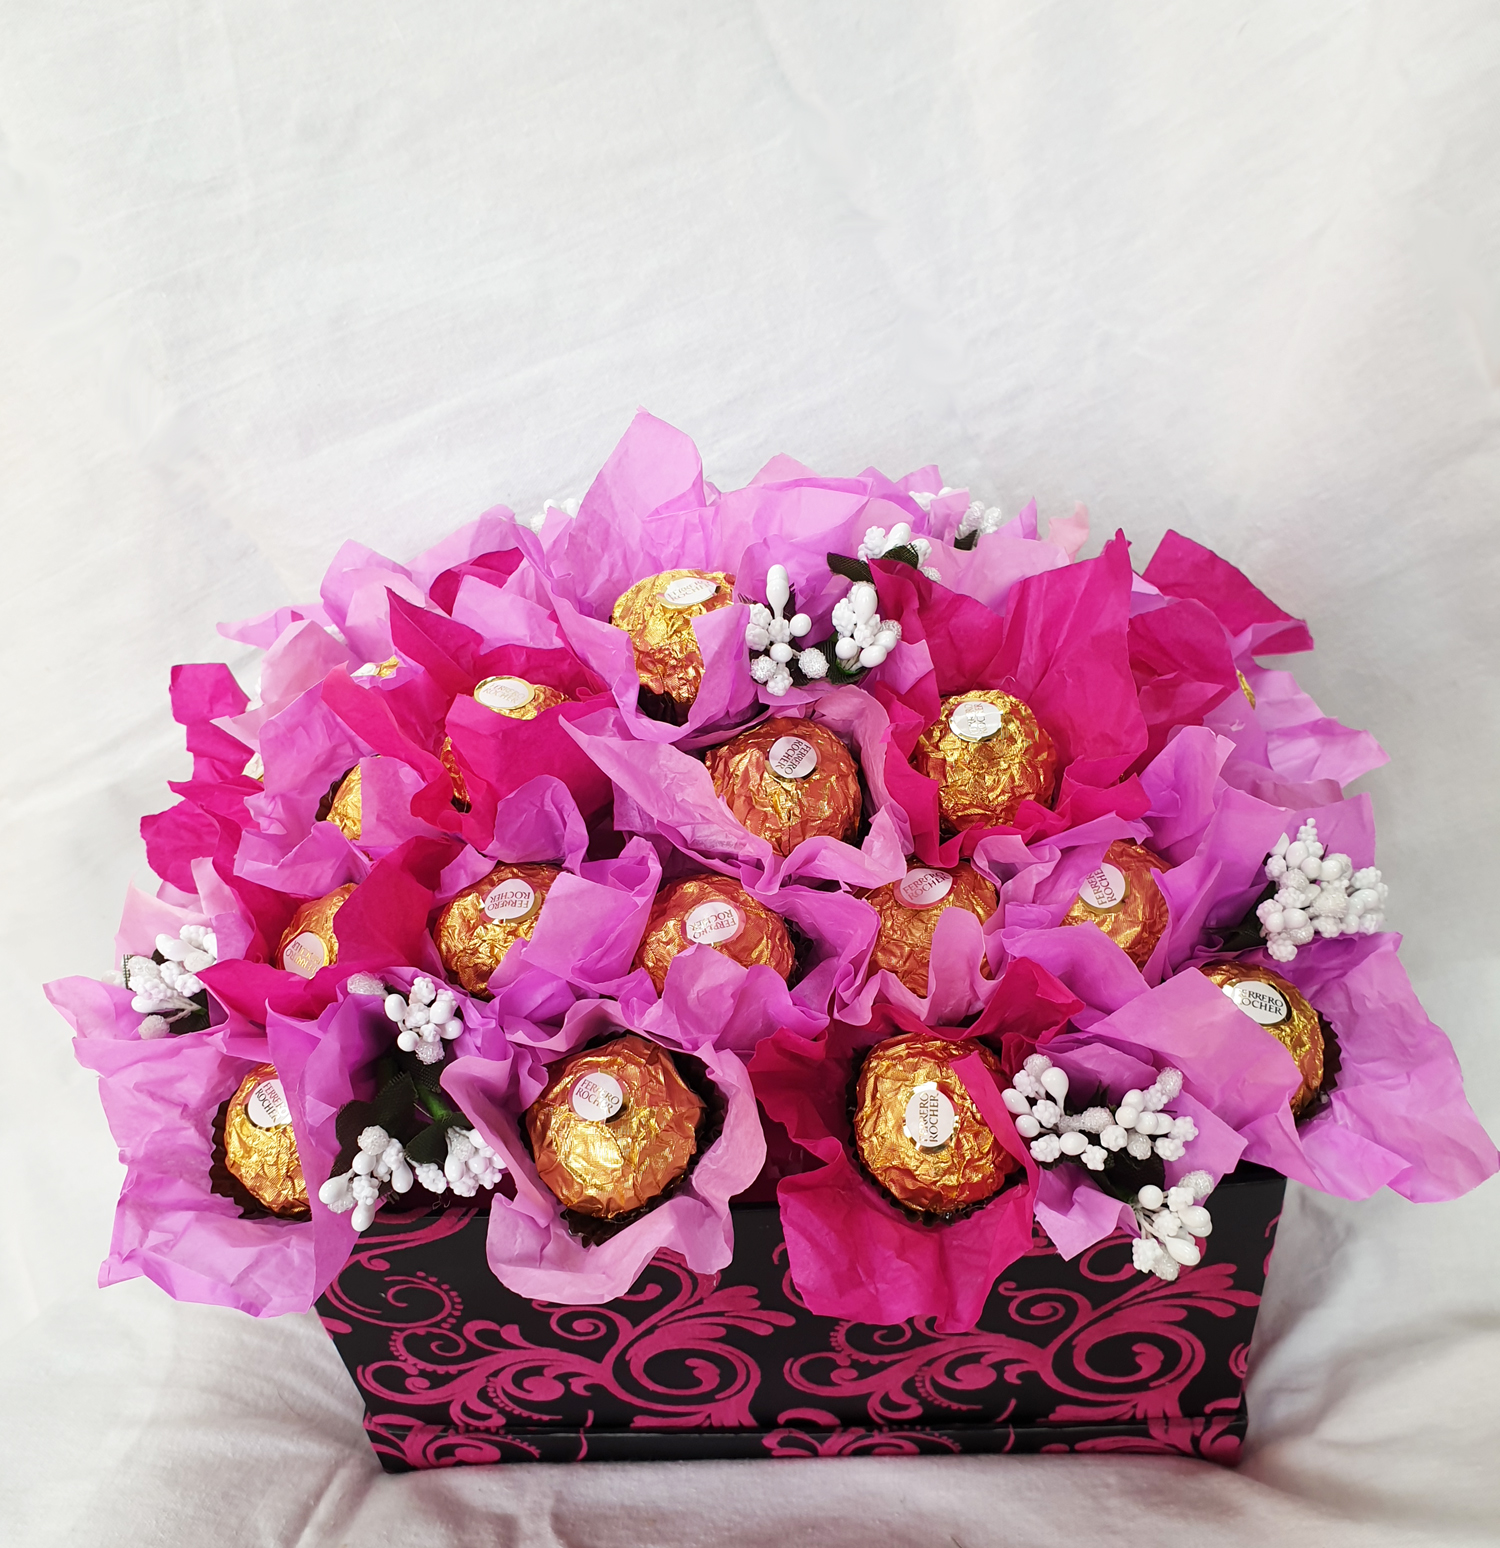 Candy bouquet in a box Pink temptation with Ferrero Rocher